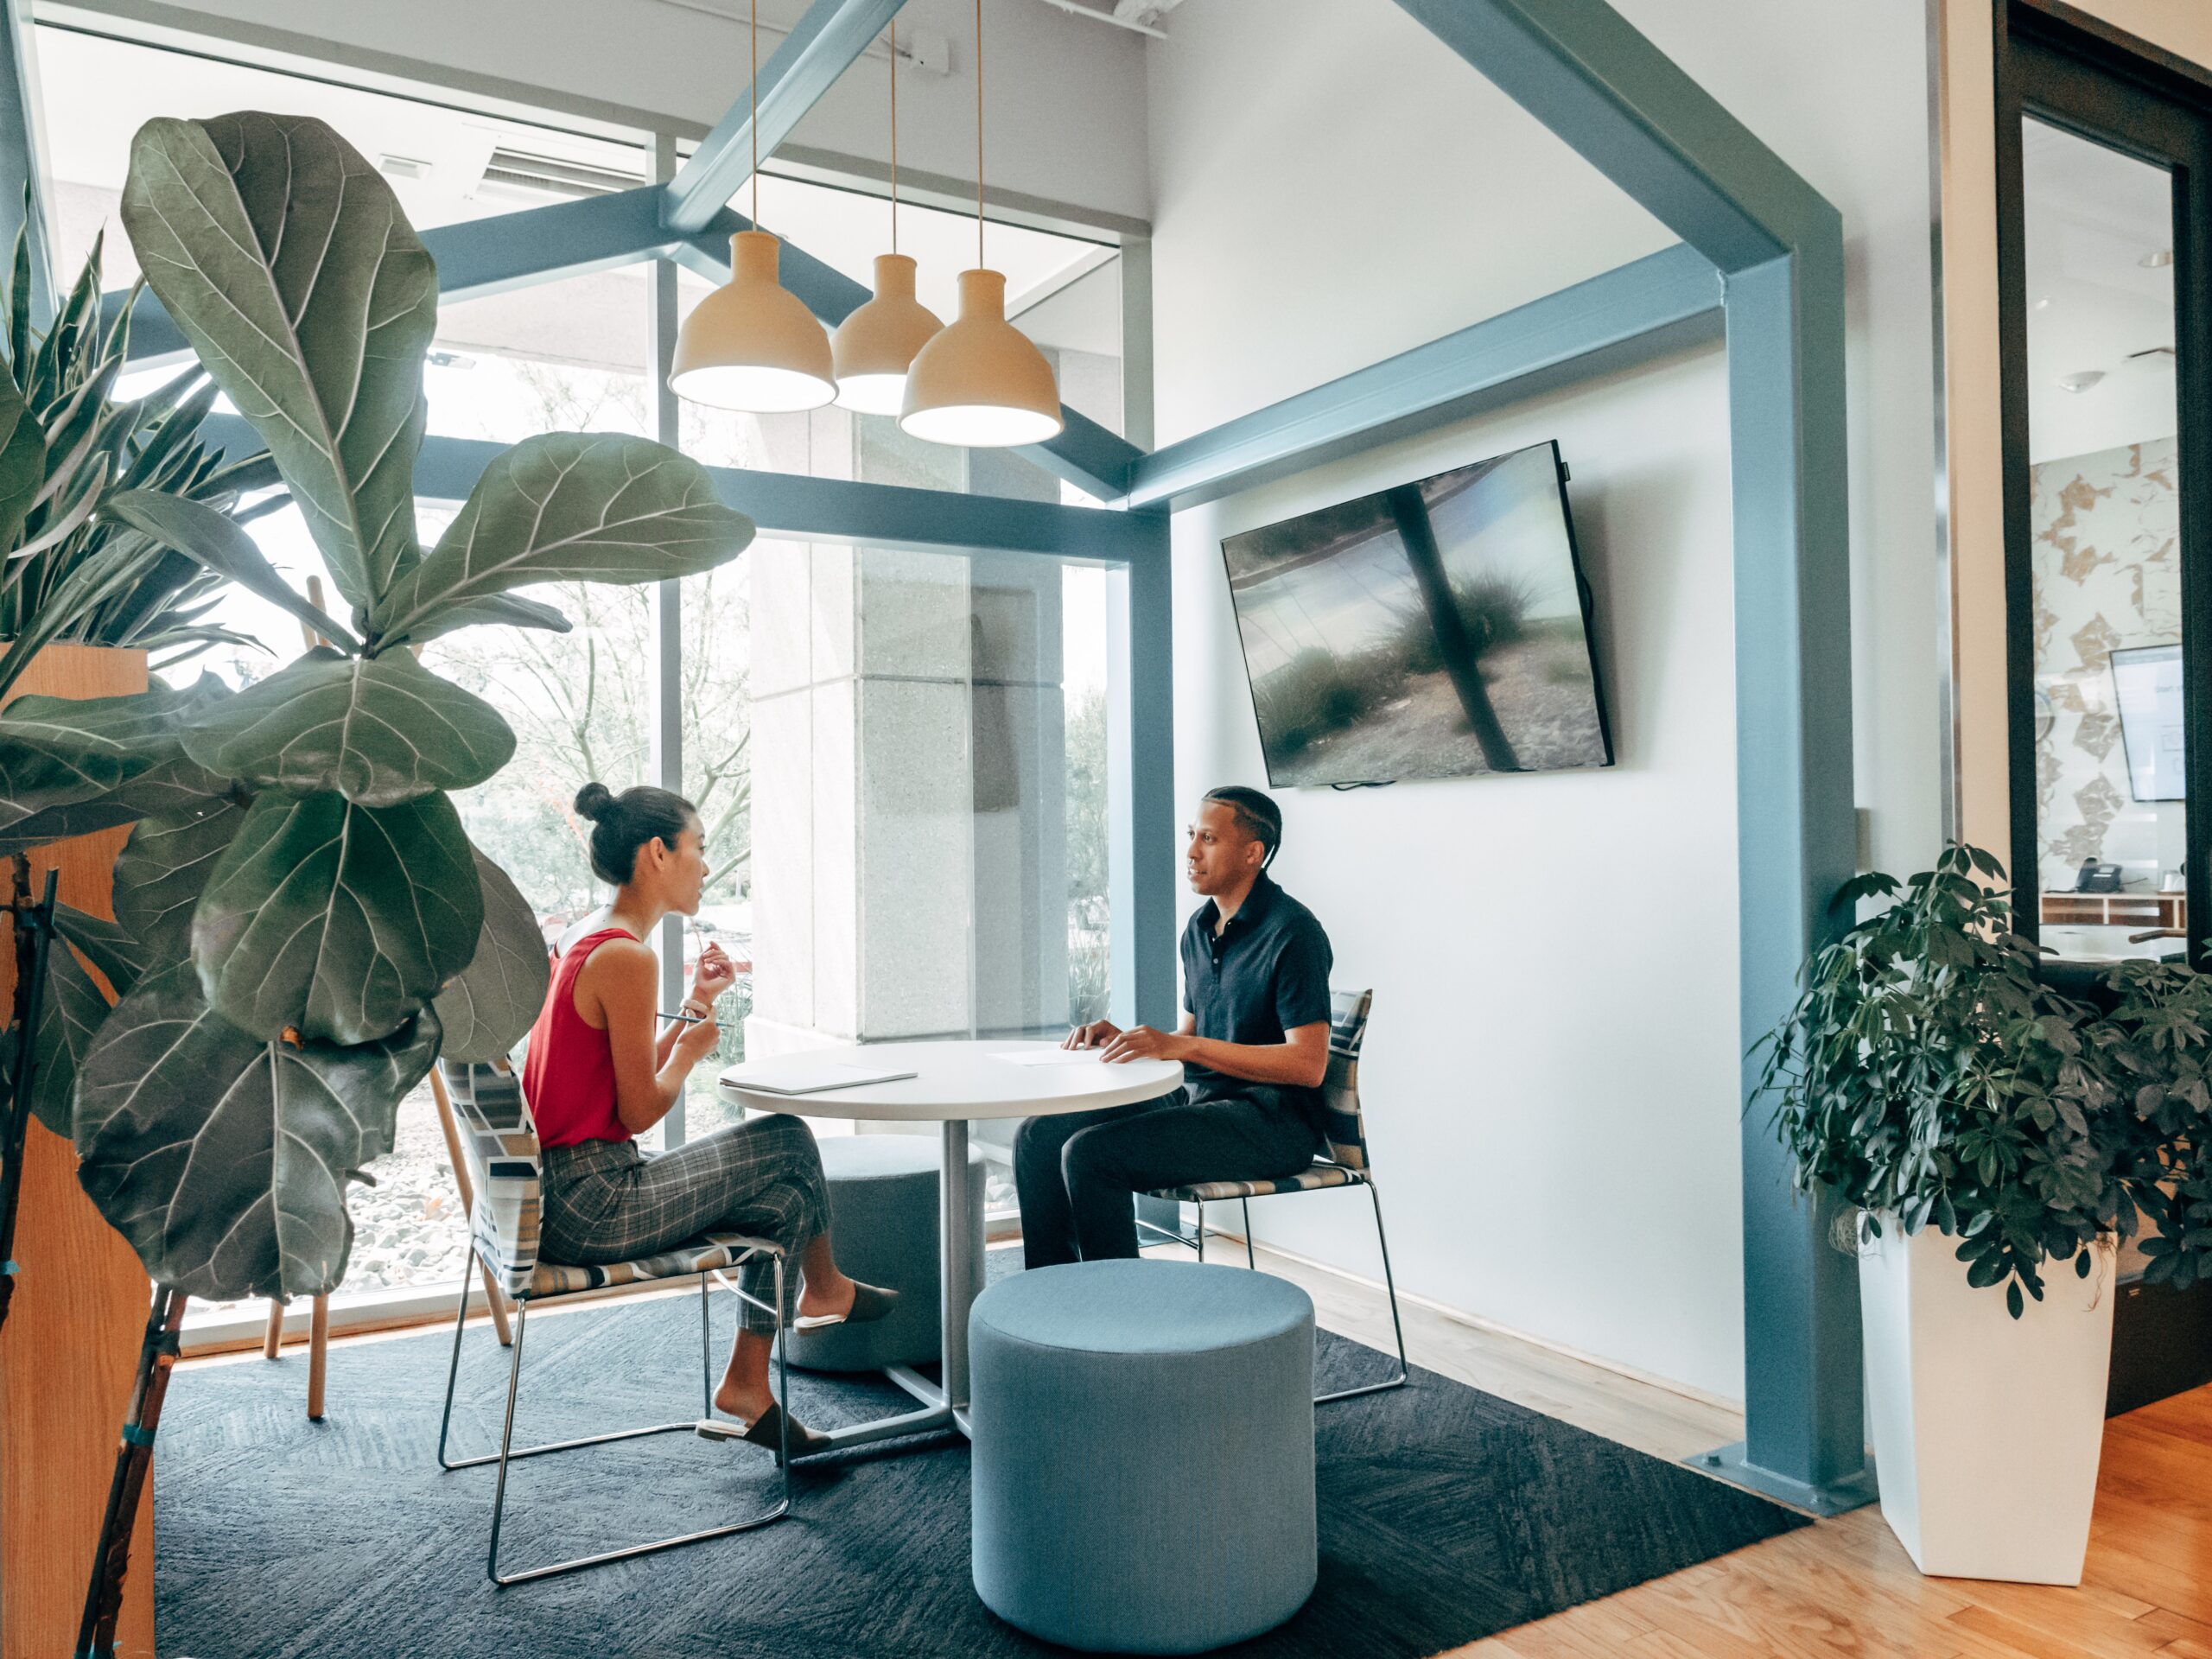 Are Communal Work Spaces Changing Commercial Real Estate?